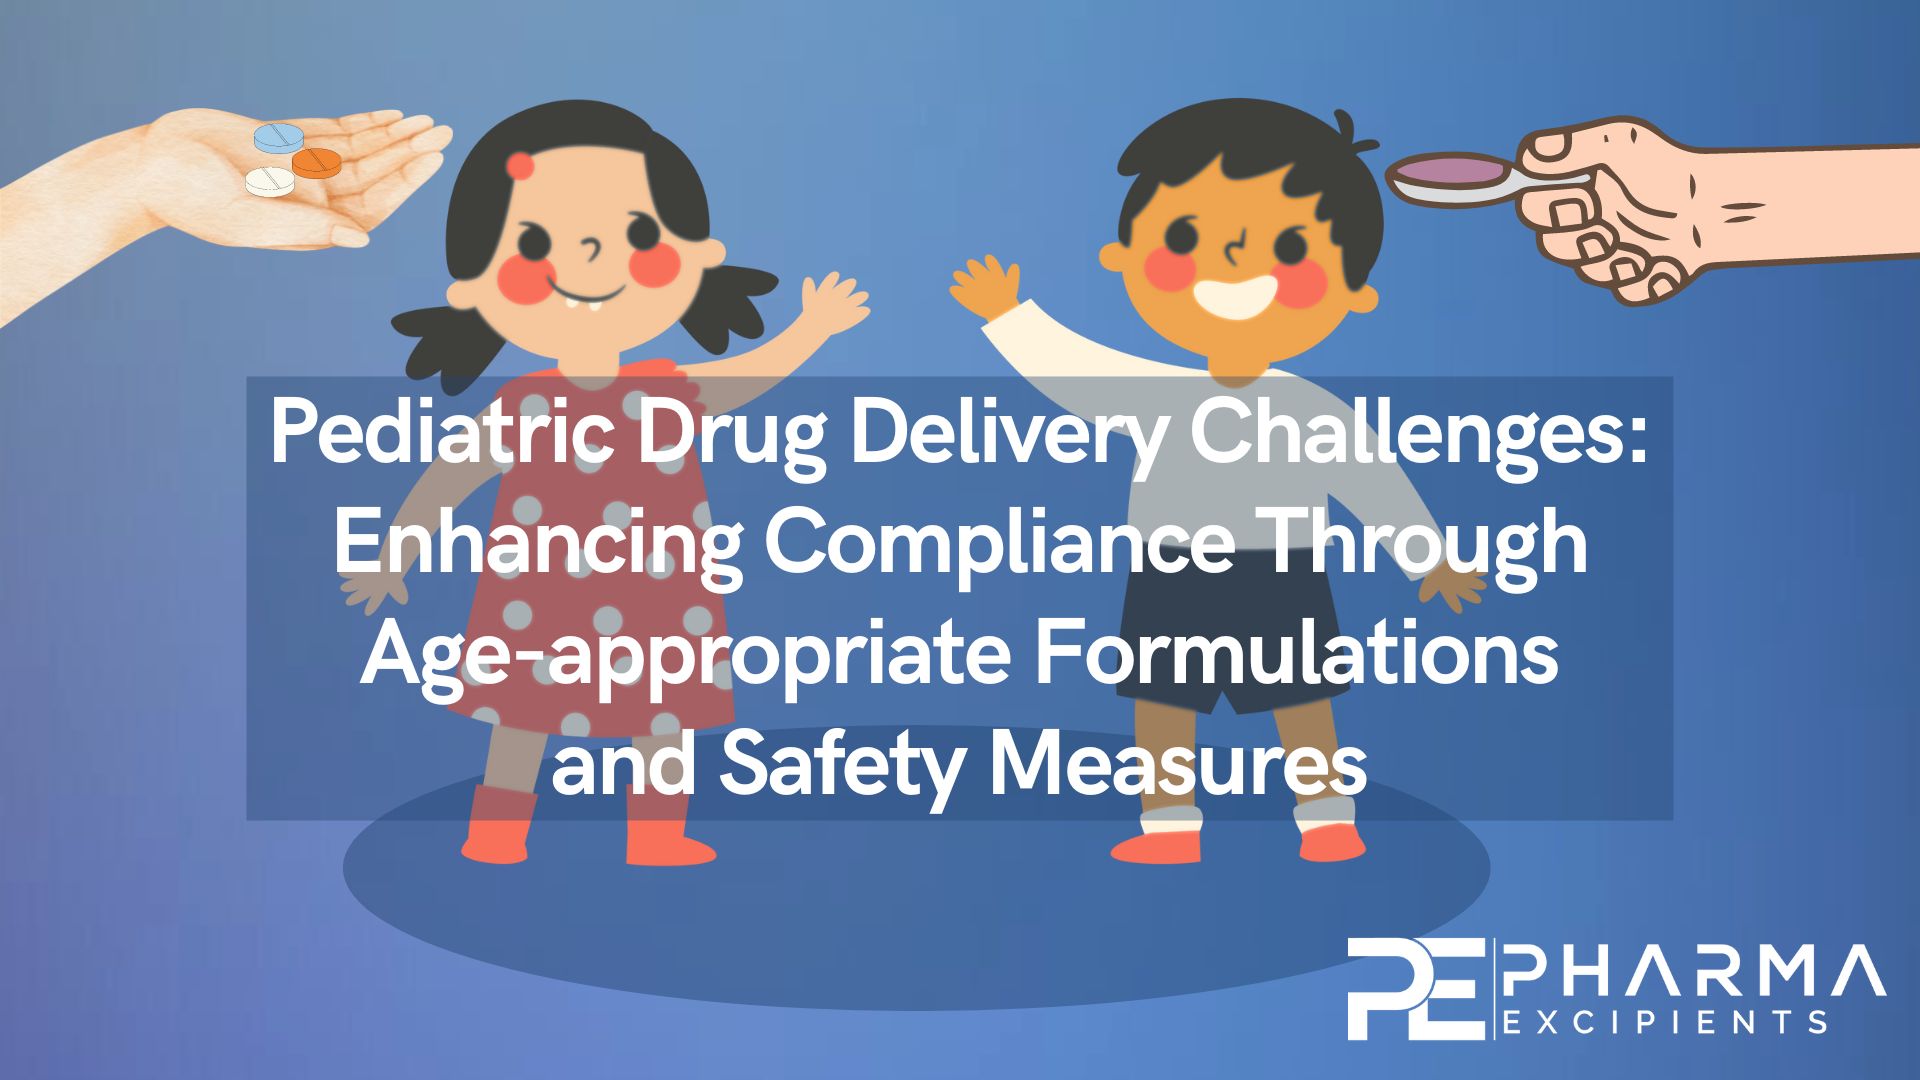 Pediatric-Drug-Delivery-Challenges-Enhancing-Compliance-Through-Age-appropriate-Formulations-and-Safety-Measures